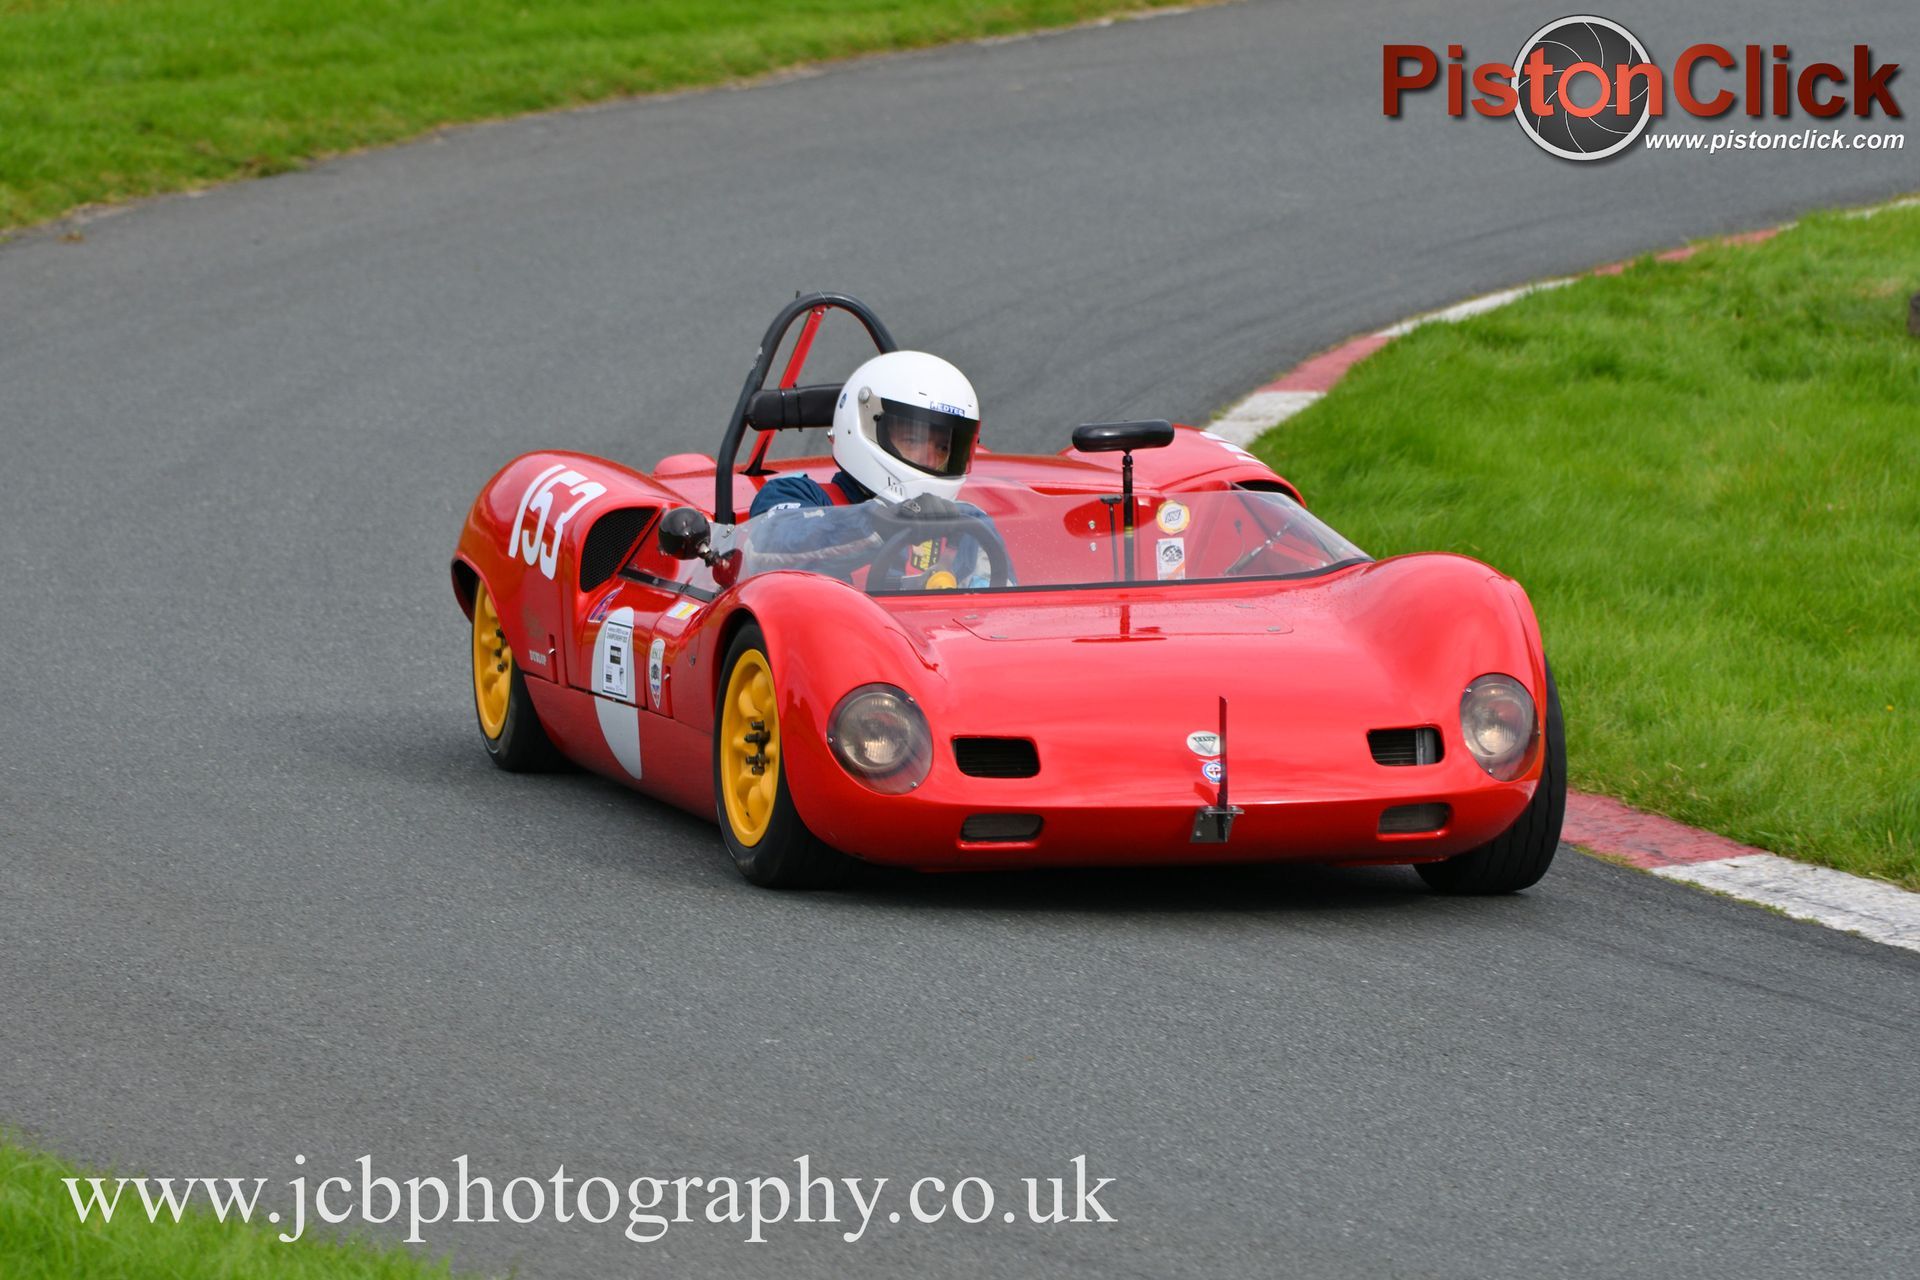 BARC Yorkshire Centre organised the Summer Championship Hillclimb event on Sunday 27th August as part of the Harewood Championship.